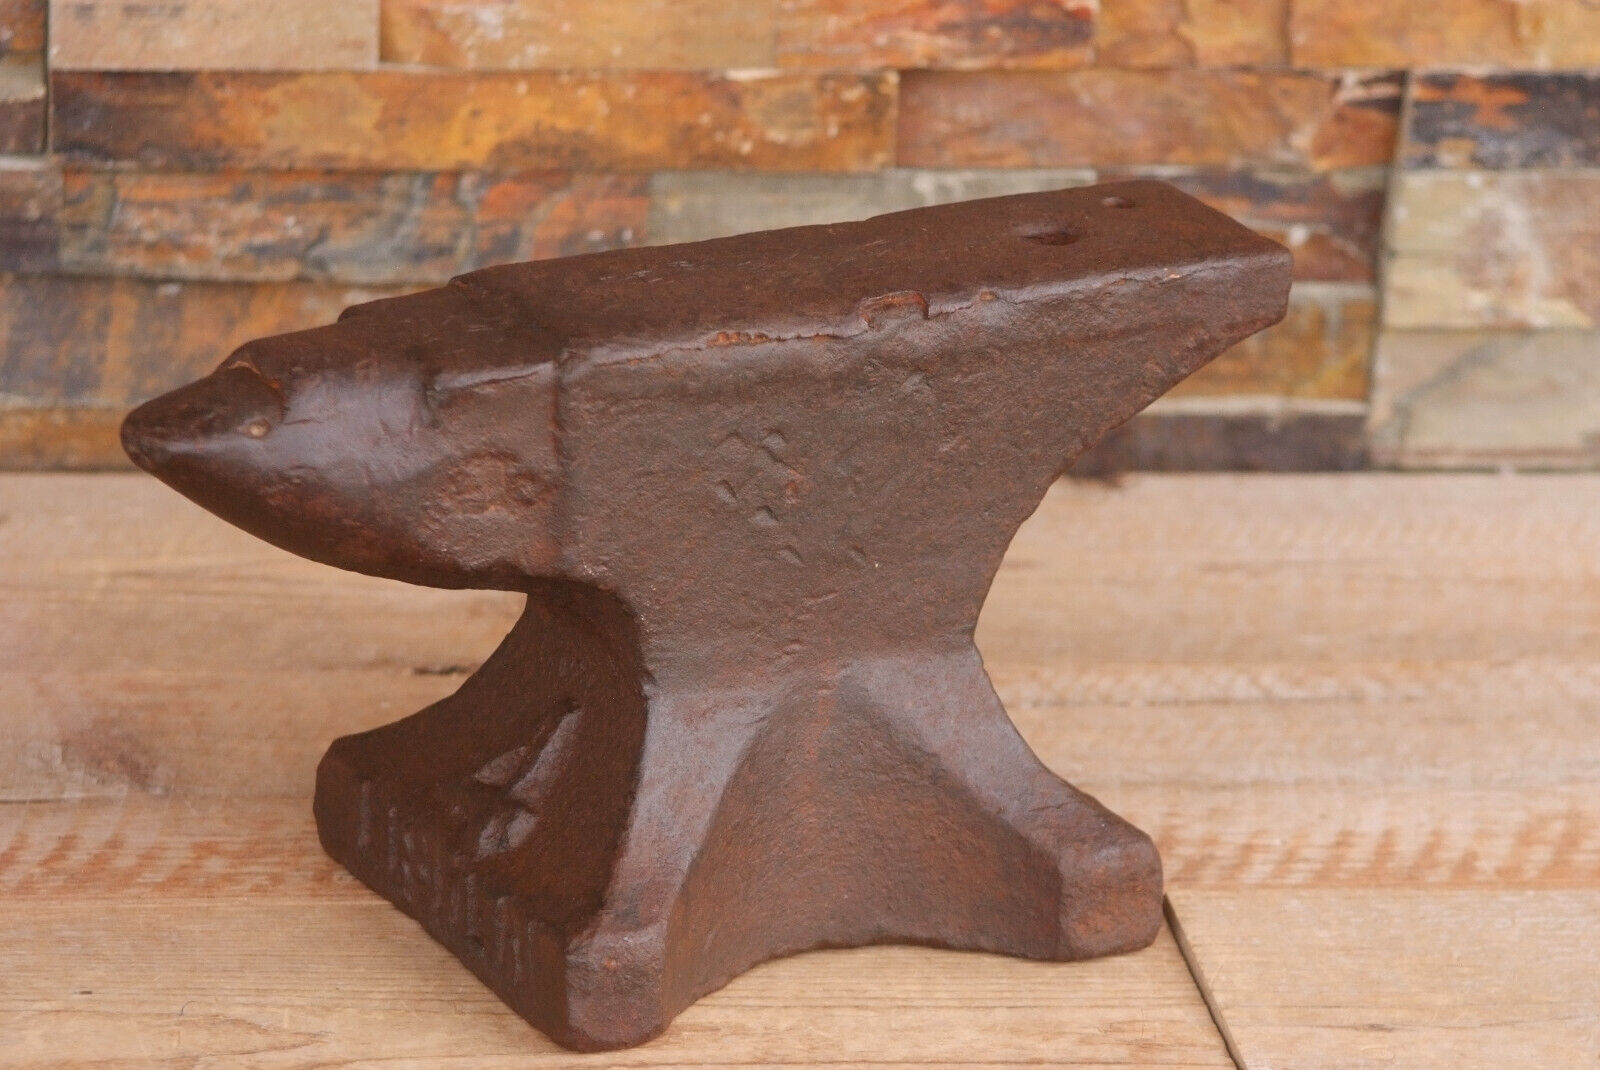 Antique Fisher Jewelers Anvil 36 lb No 4 Collectible Blacksmith Bench Tool